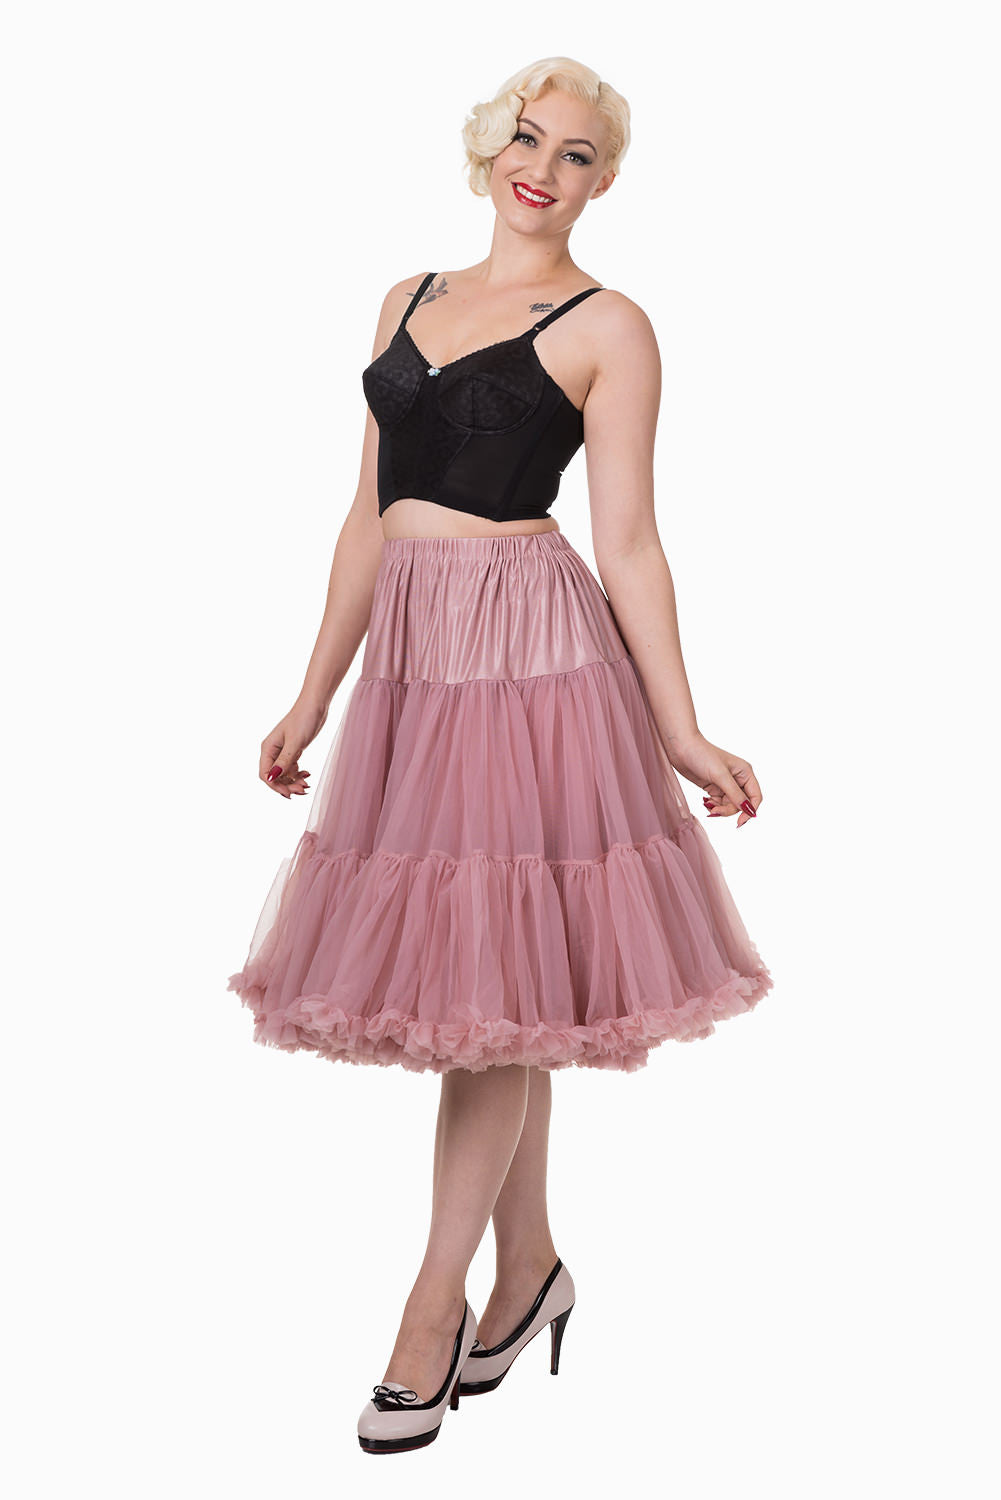 Dancing Days 50s Style 25"-27" Long Petticoat In Dusky Pink